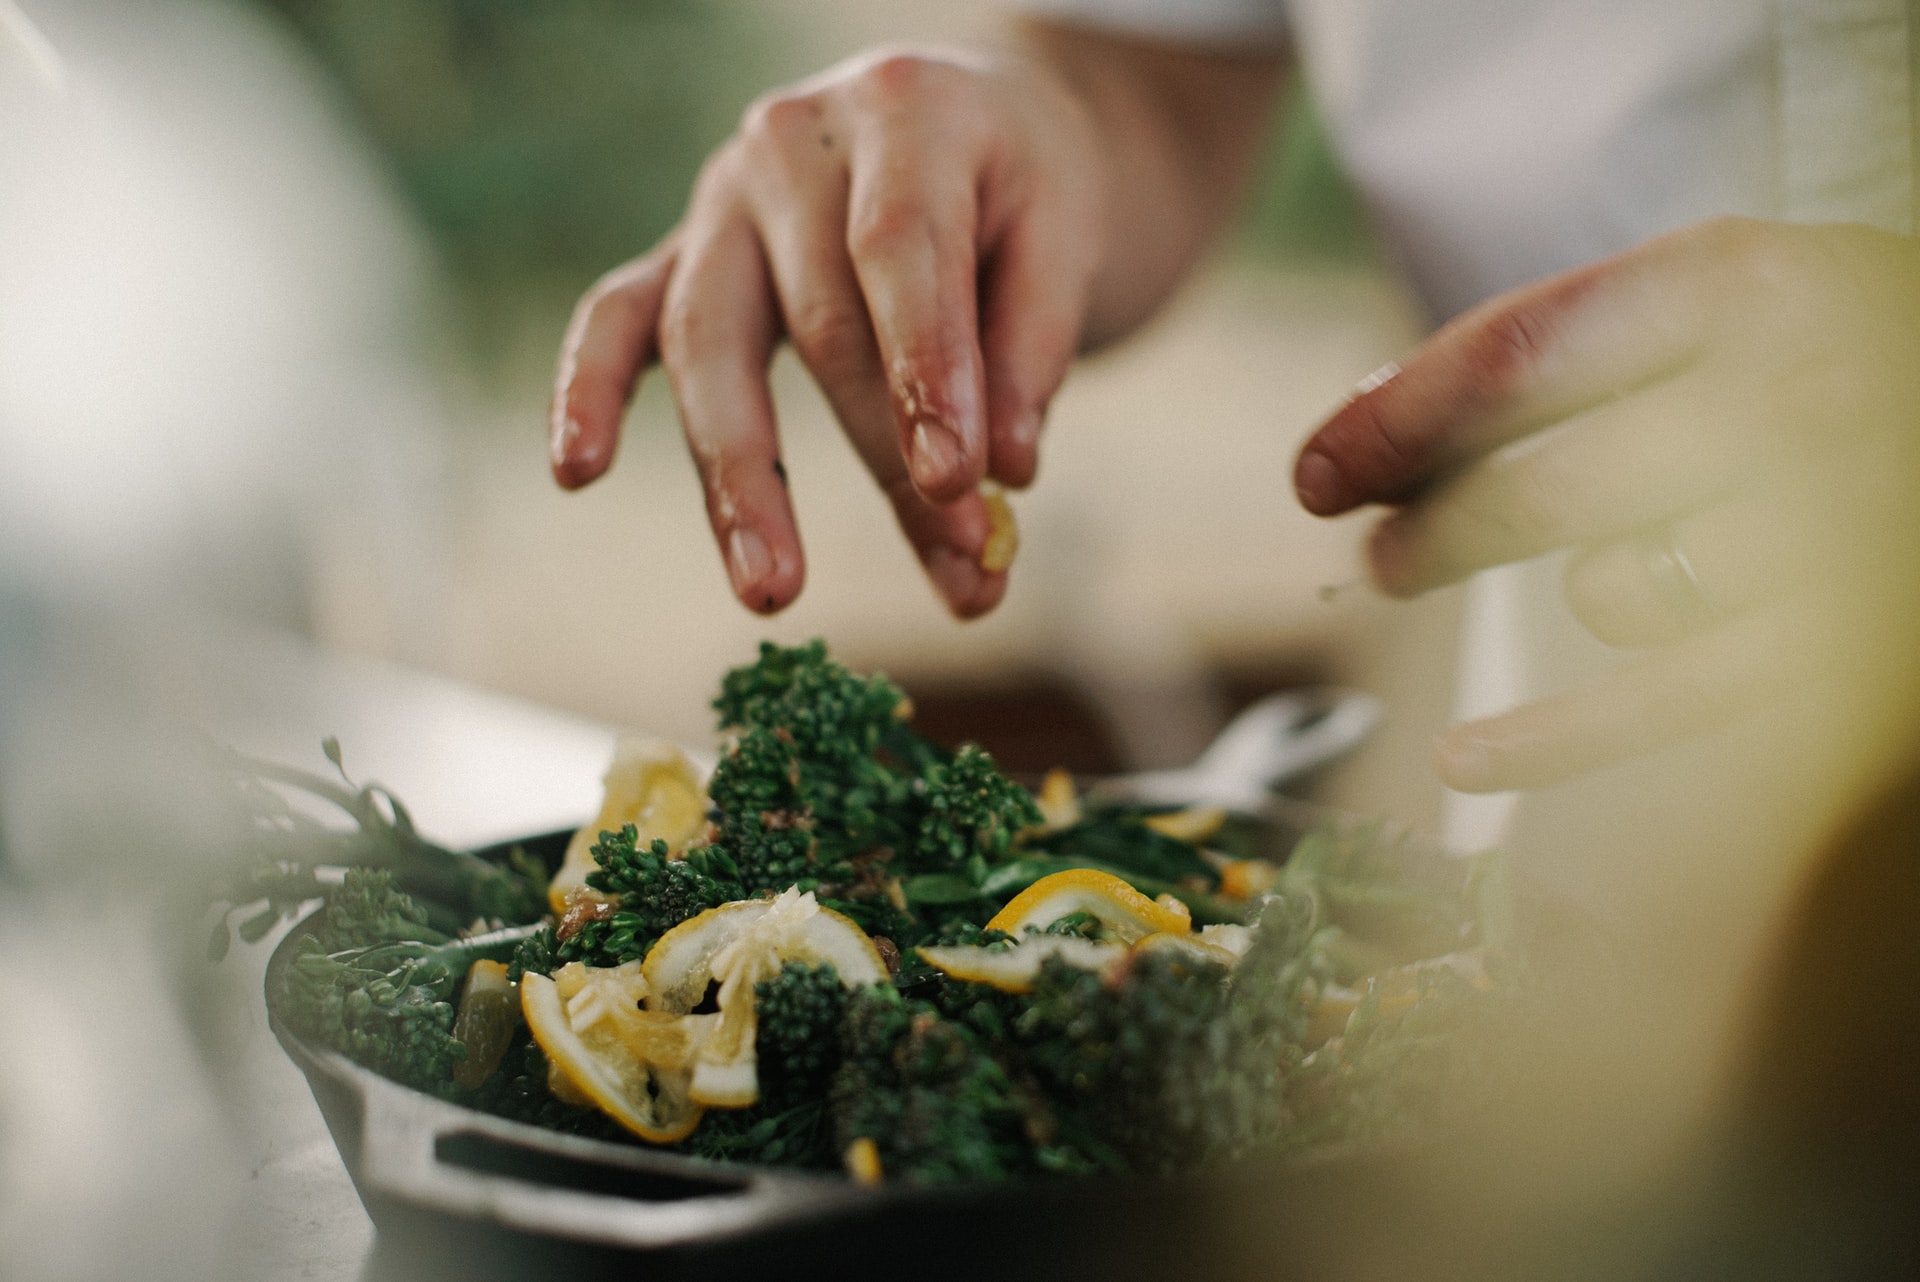 Is it worth taking cooking classes? - PMCAOnline